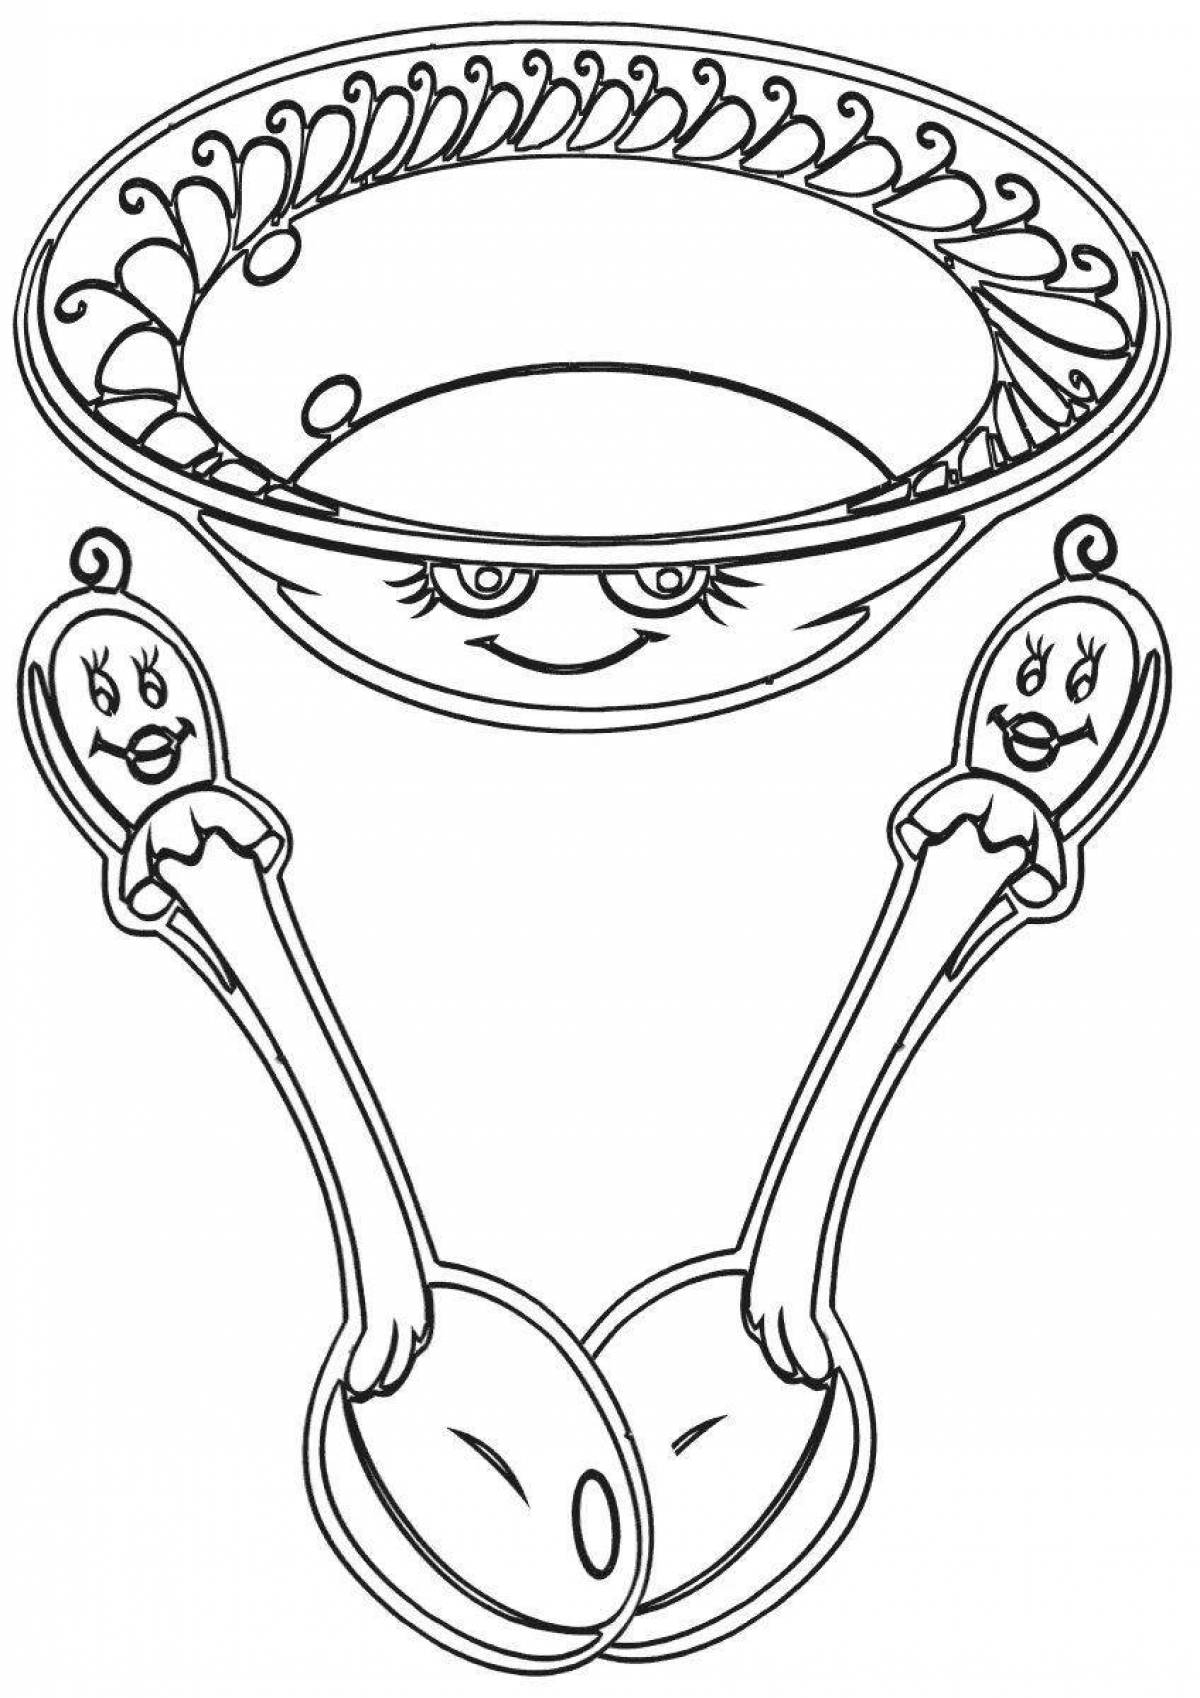 Adorable wooden spoon coloring page